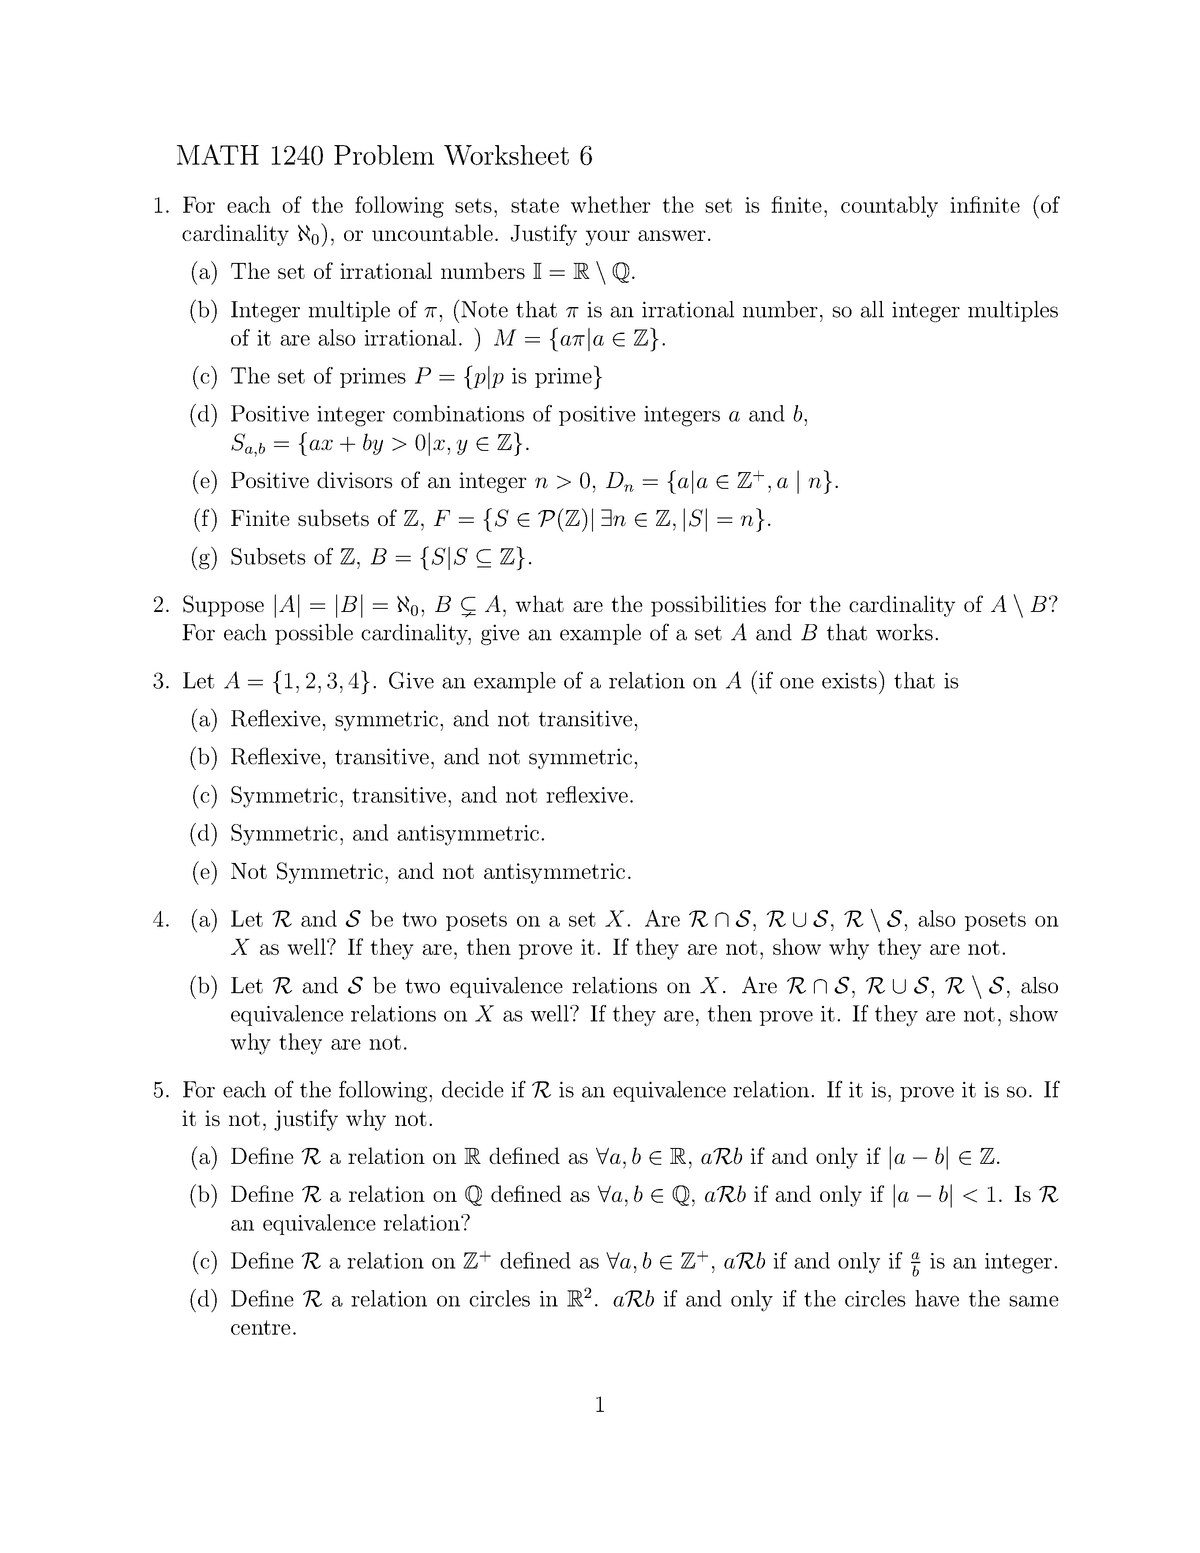 worksheet-6questions-math-math-1240-problem-worksheet-6-for-each-of-the-following-sets